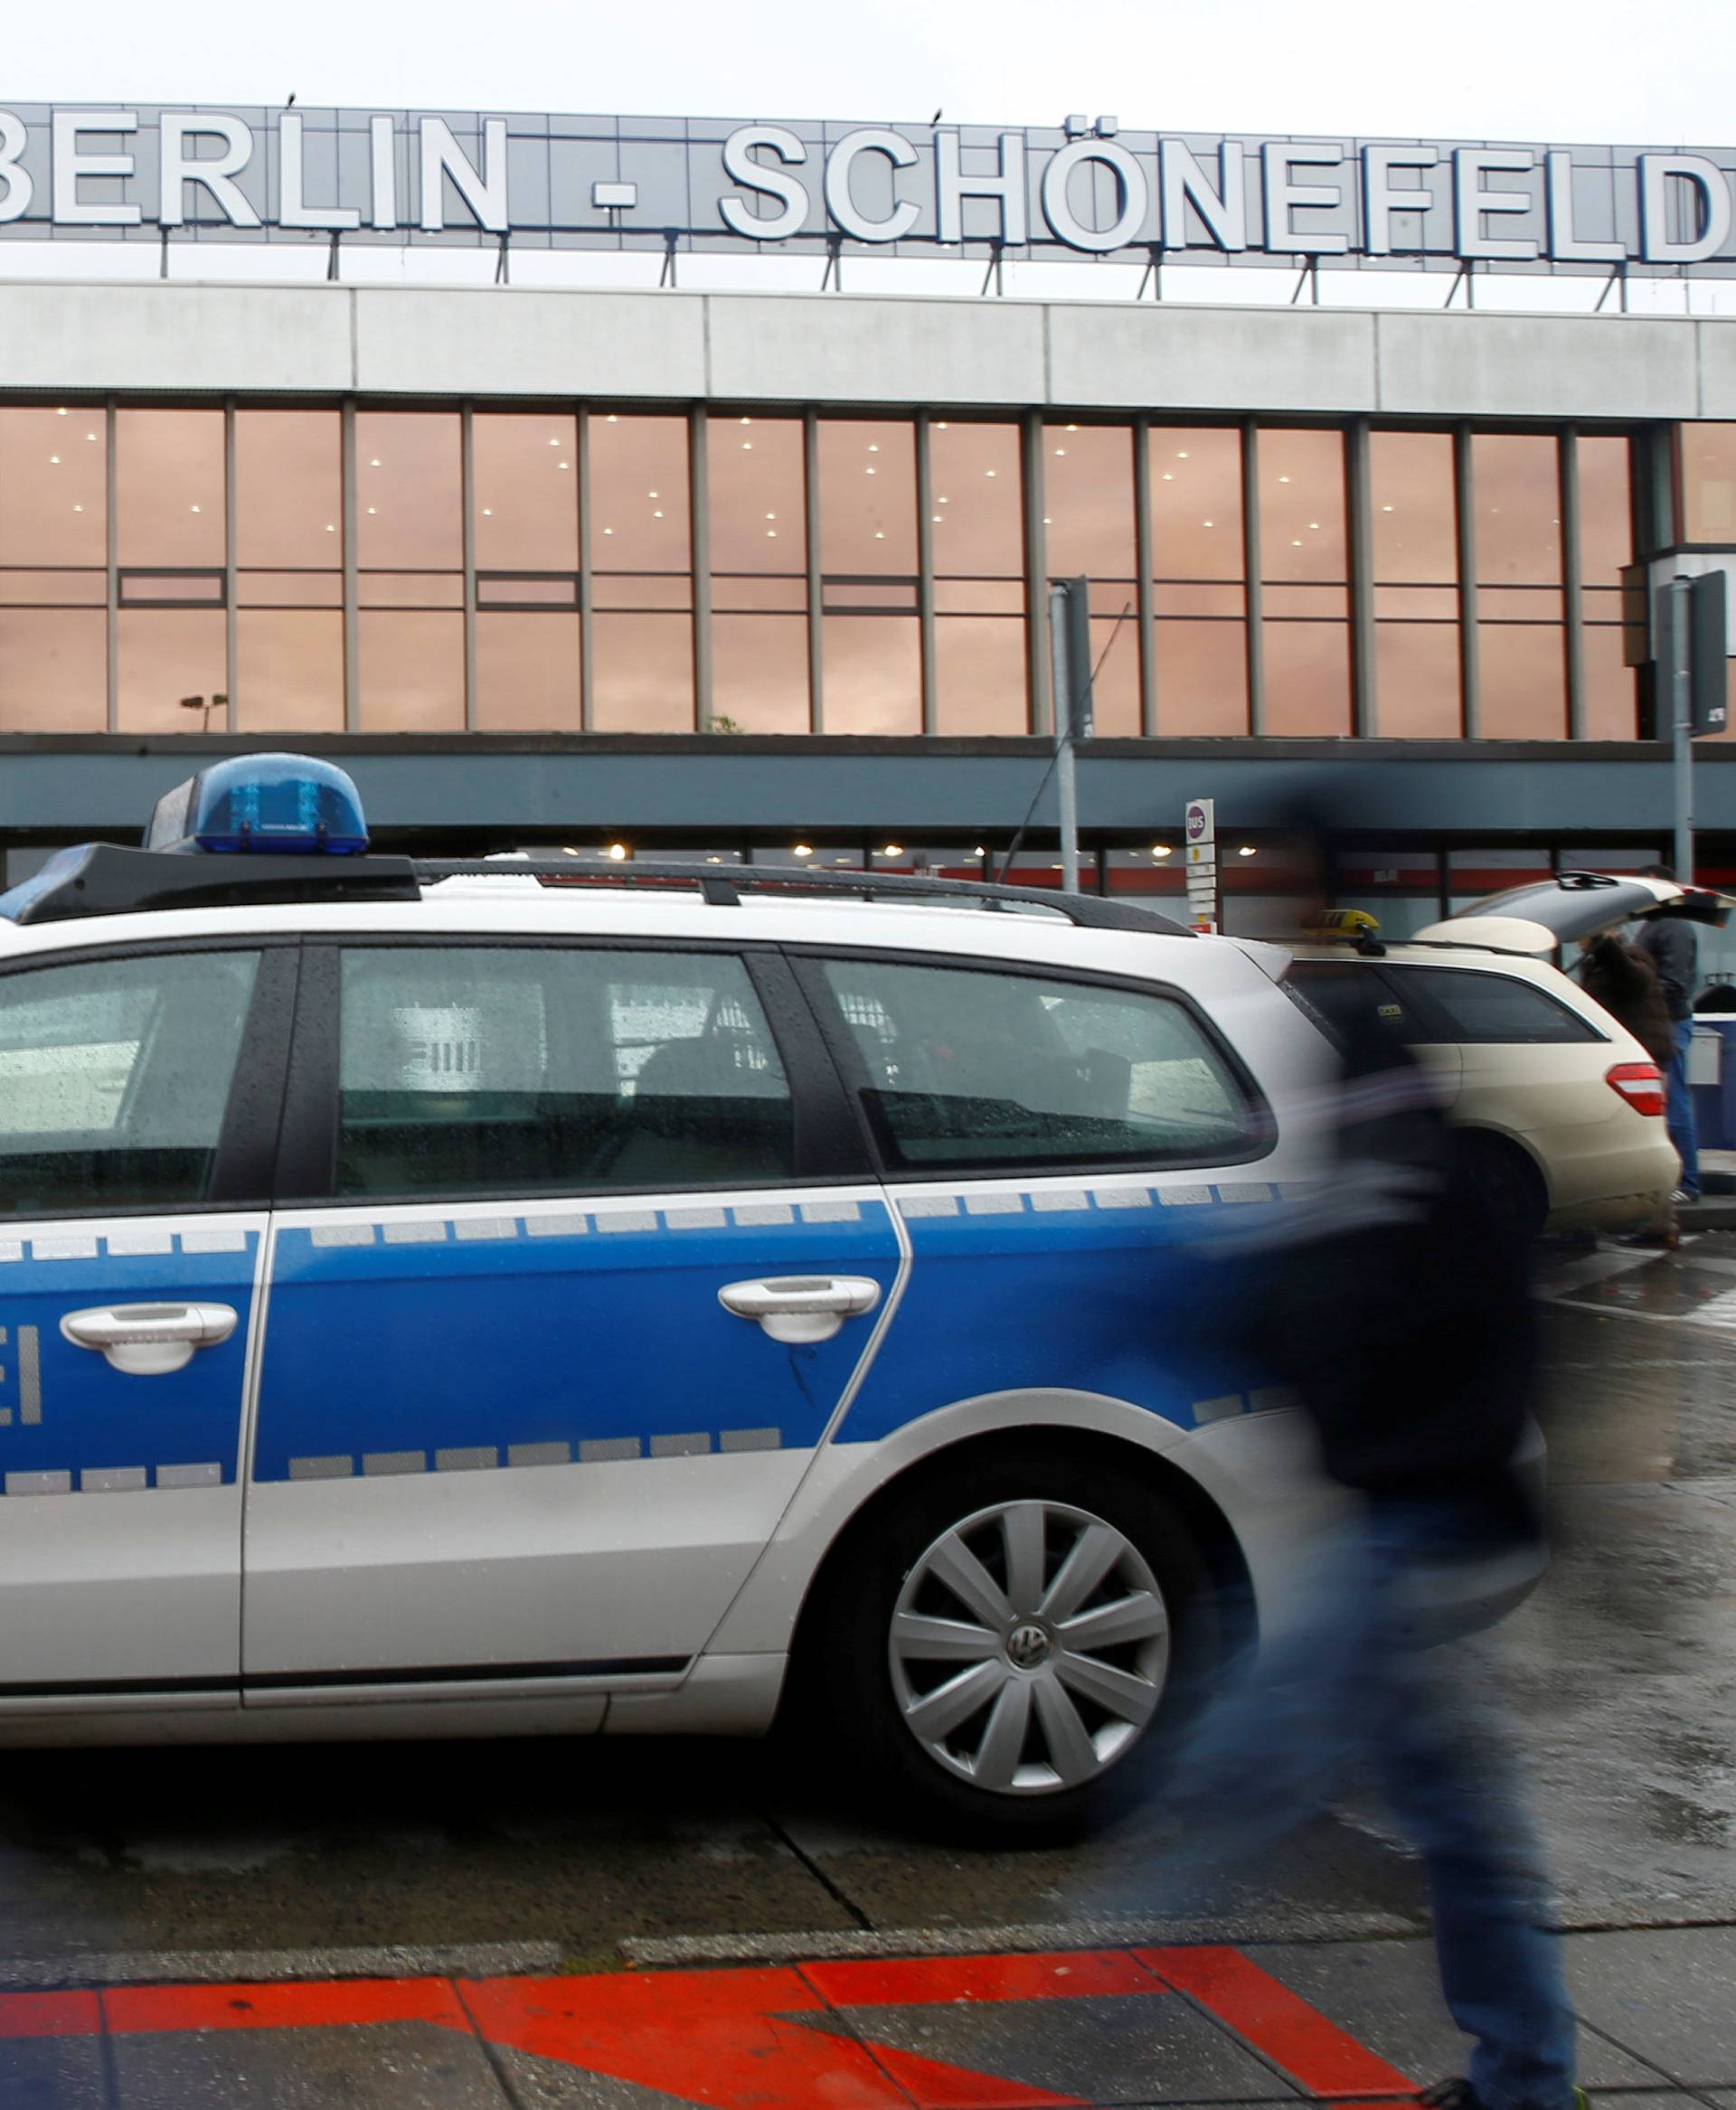 A police car stands in front of the main terminal of Berlin-Schoenefeld airport, in Schoenefeld